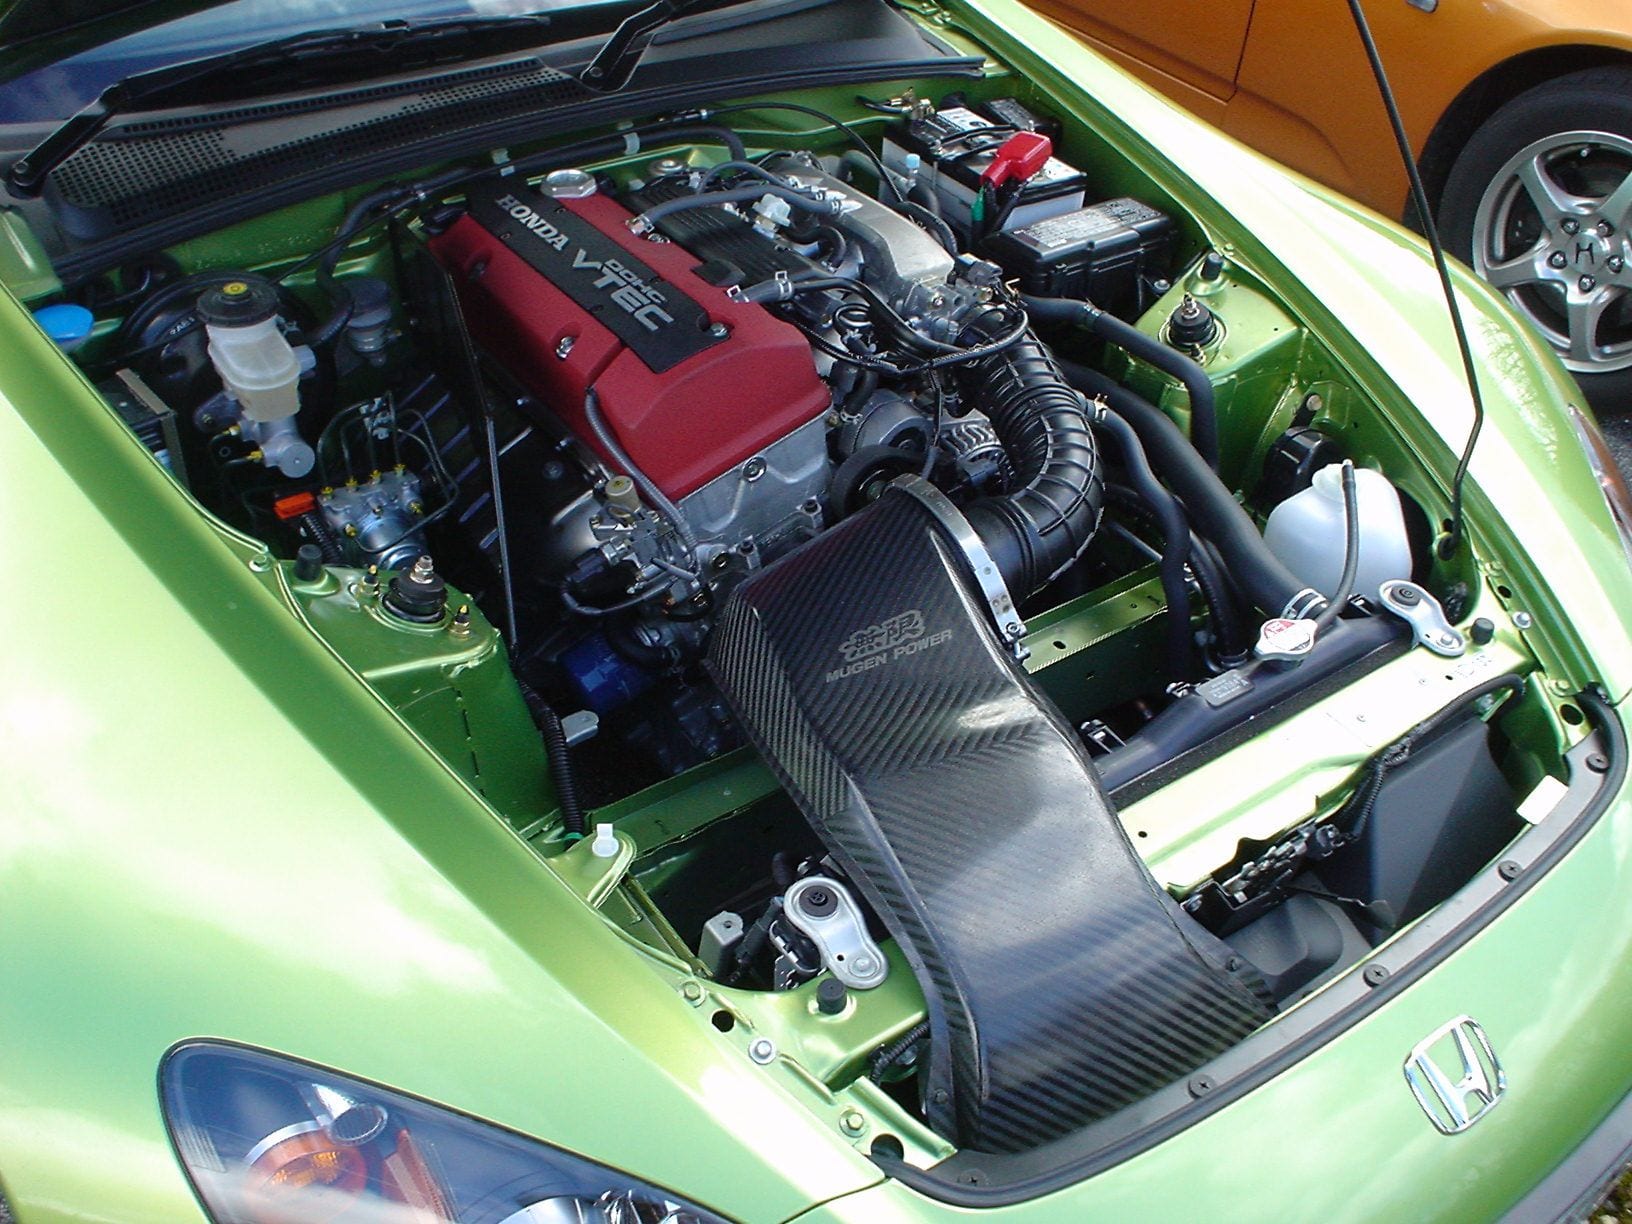 EK Civic Build Has Mugen Everything, and Has Us Green with Envy - Honda-Tech